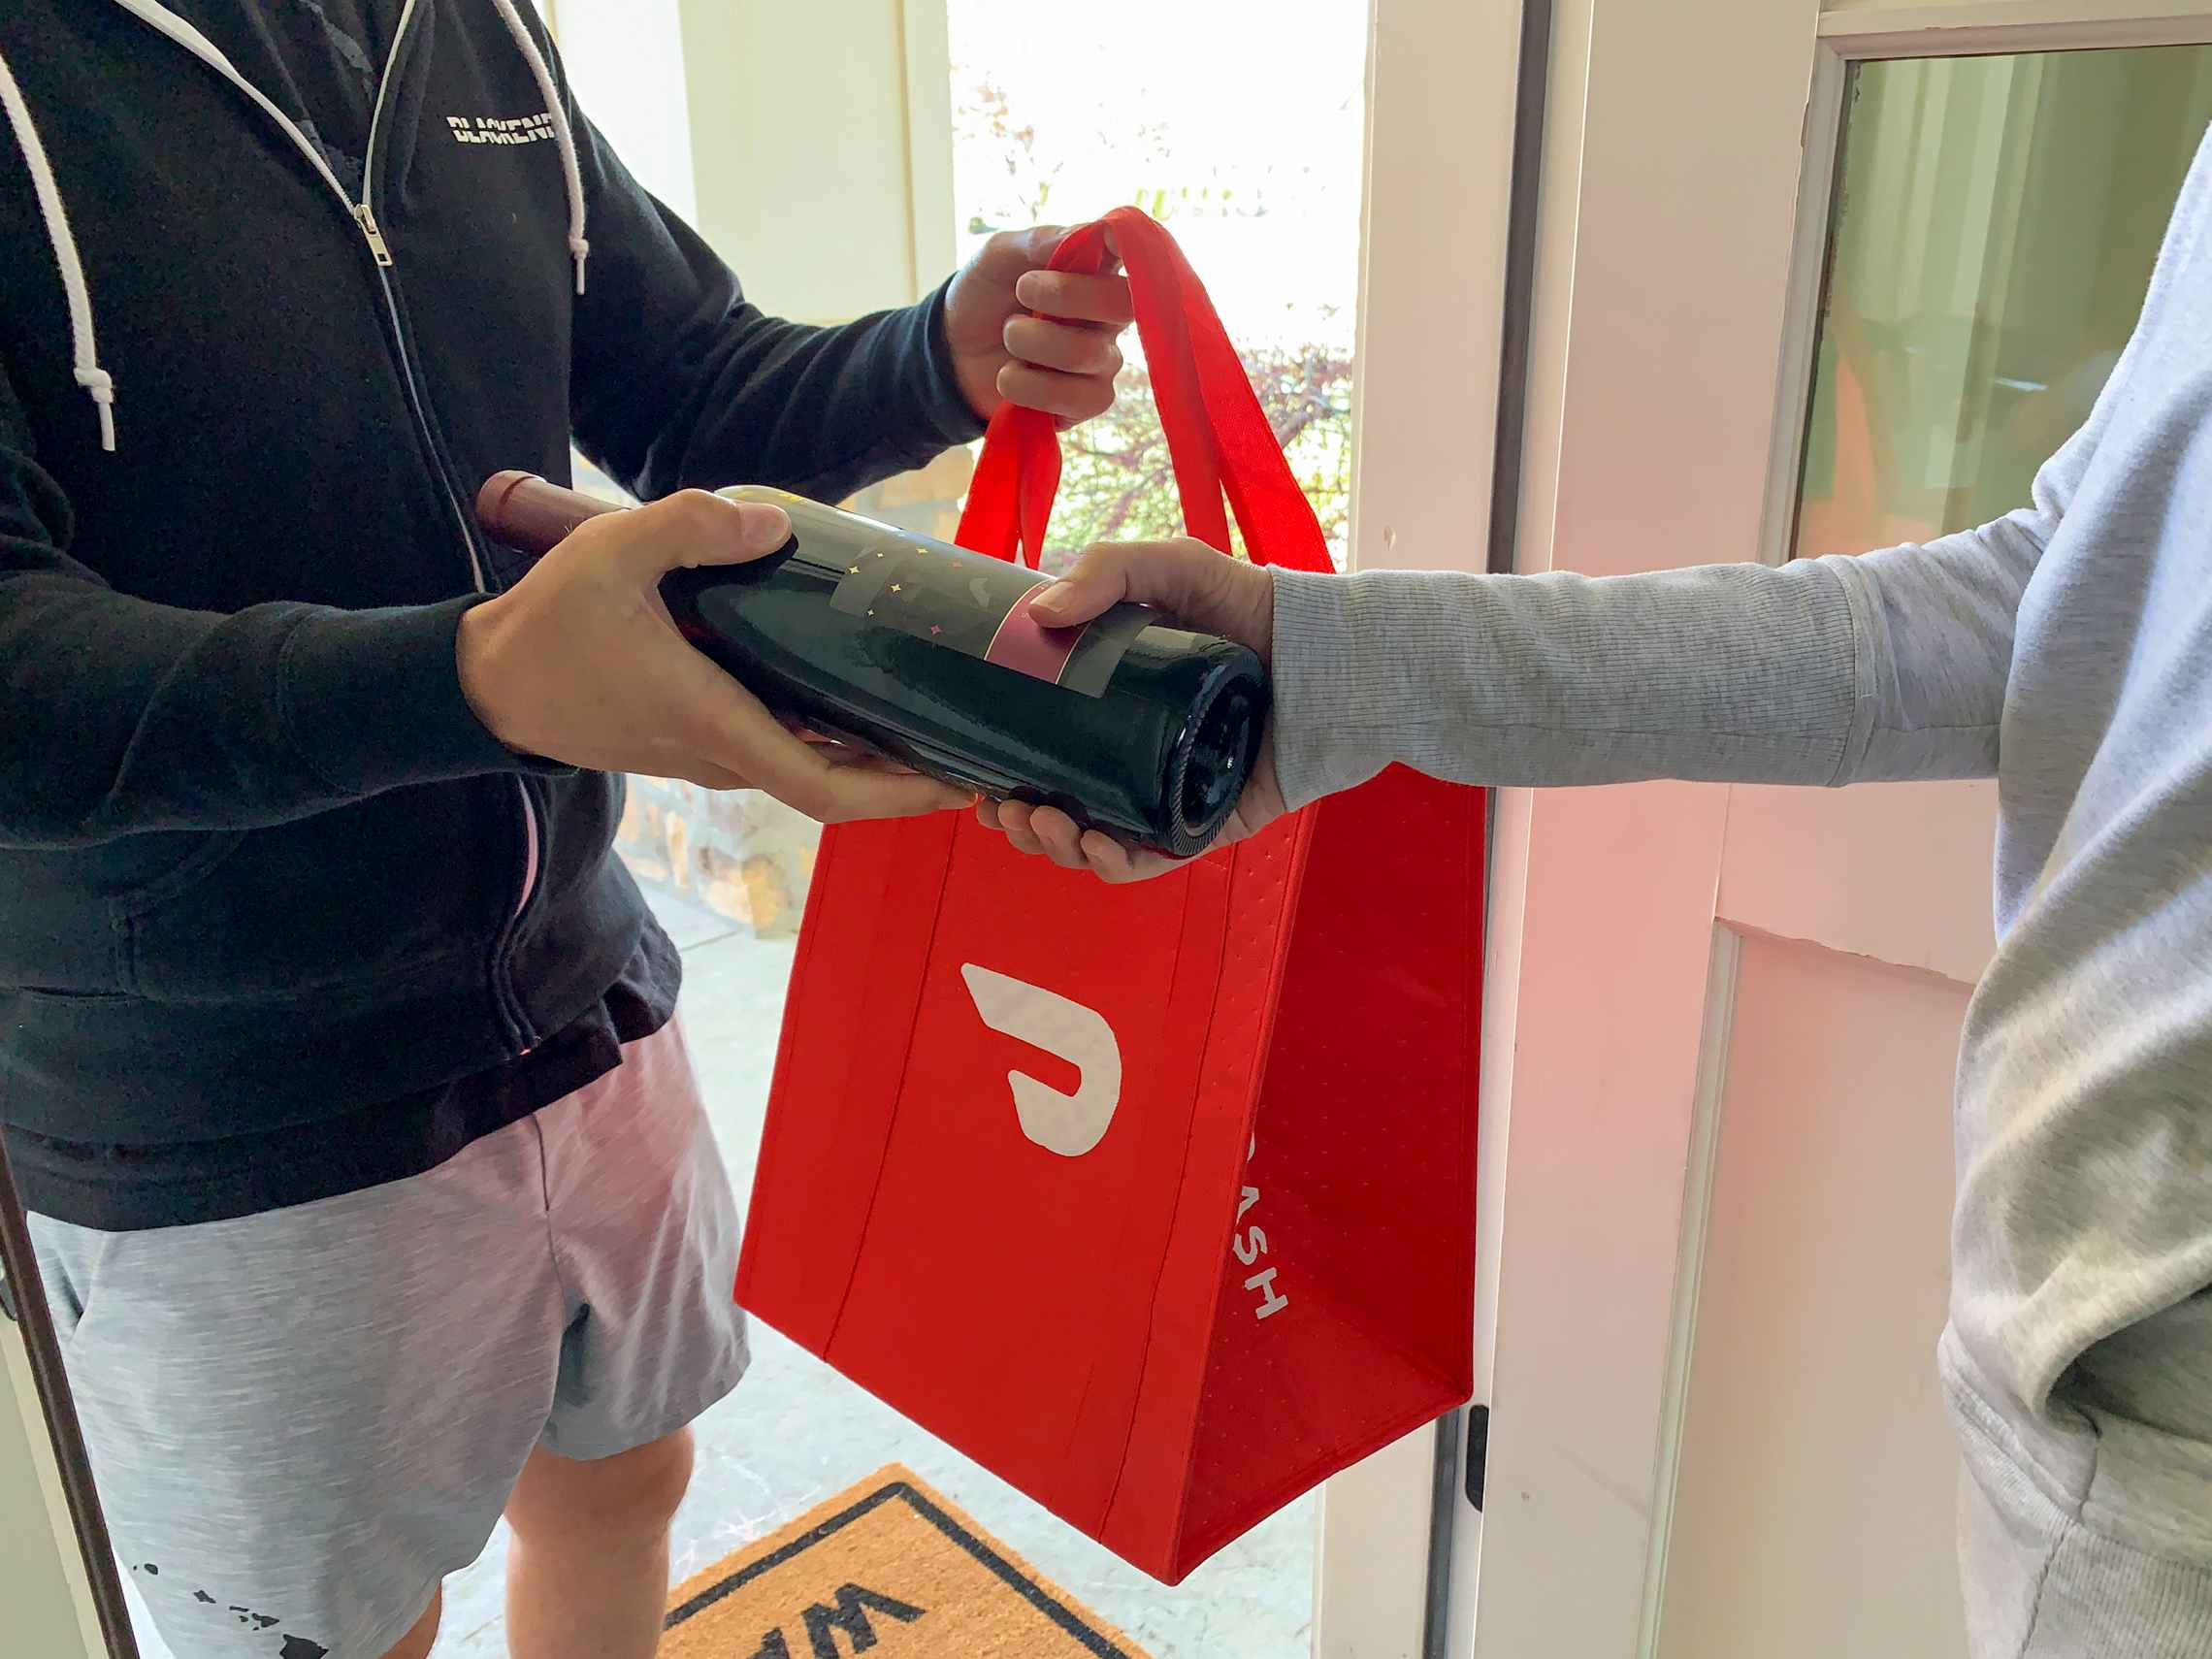 A Doordash employee holding a Doordash bag and handing a bottle of wine to someone in their front doorway.